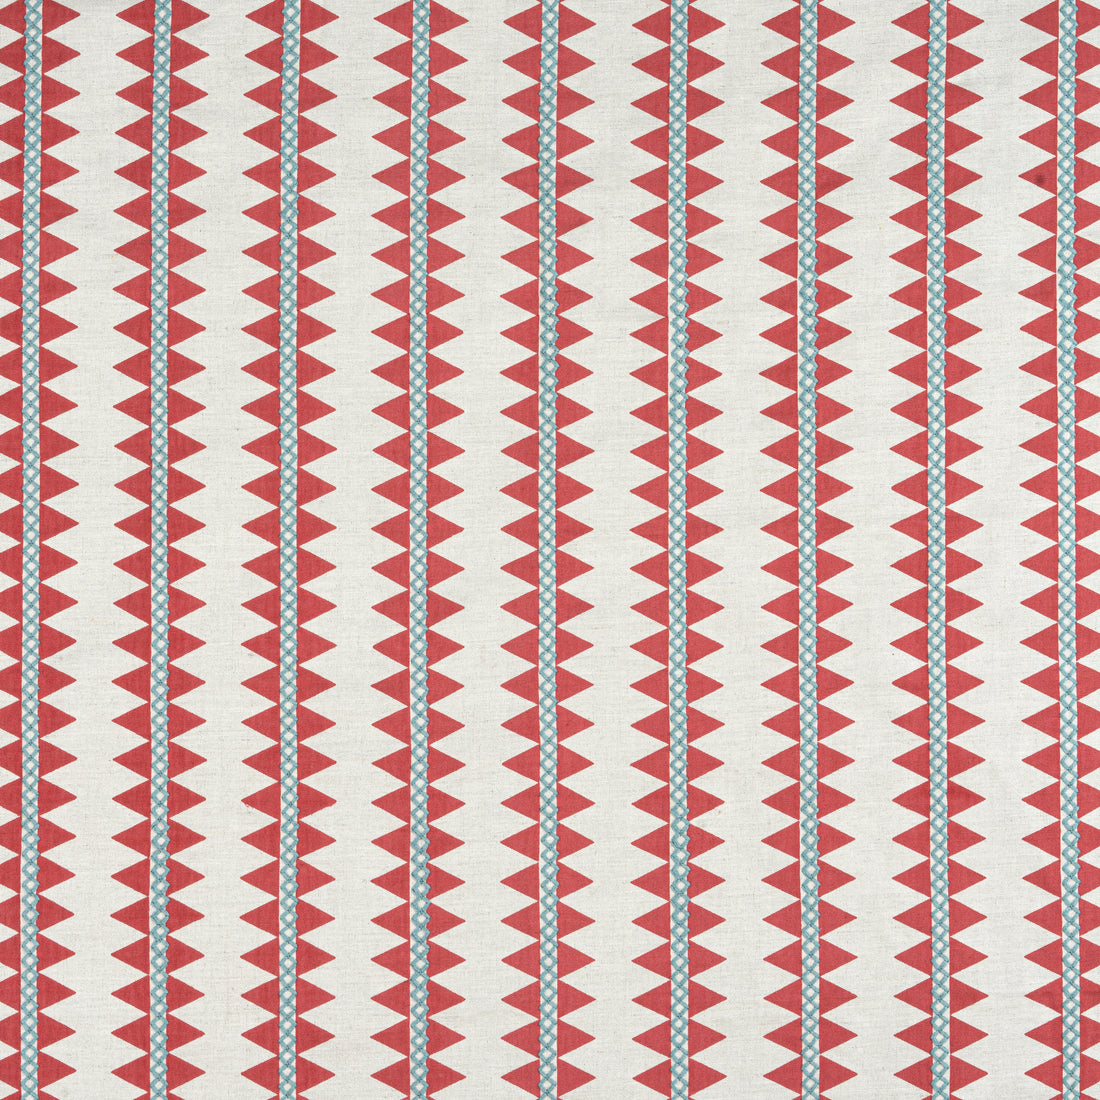 Reno Stripe Embroidery fabric in coral color - pattern number W713245 - by Thibaut in the Mesa Fabrics collection